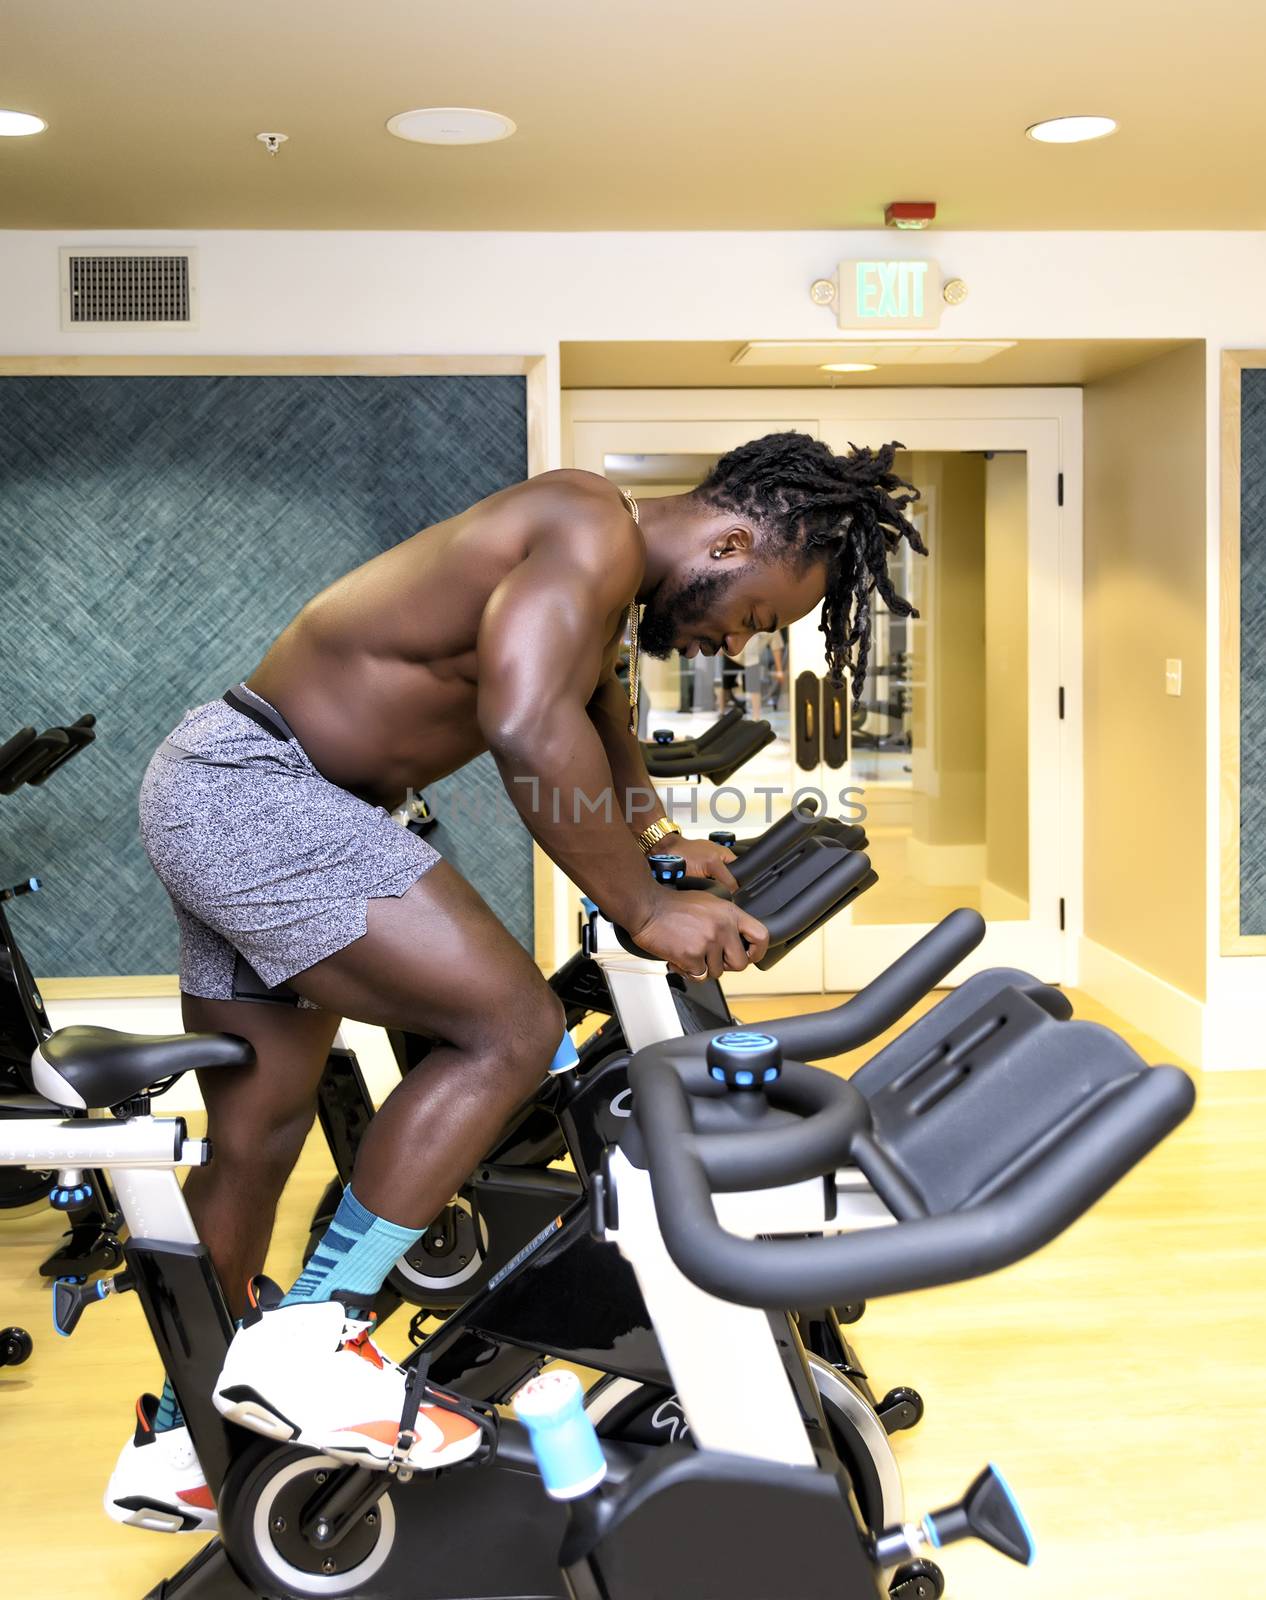 Handsome, young, muscular African American man, a bodybuilder, riding as stationary bicycle in the gym.